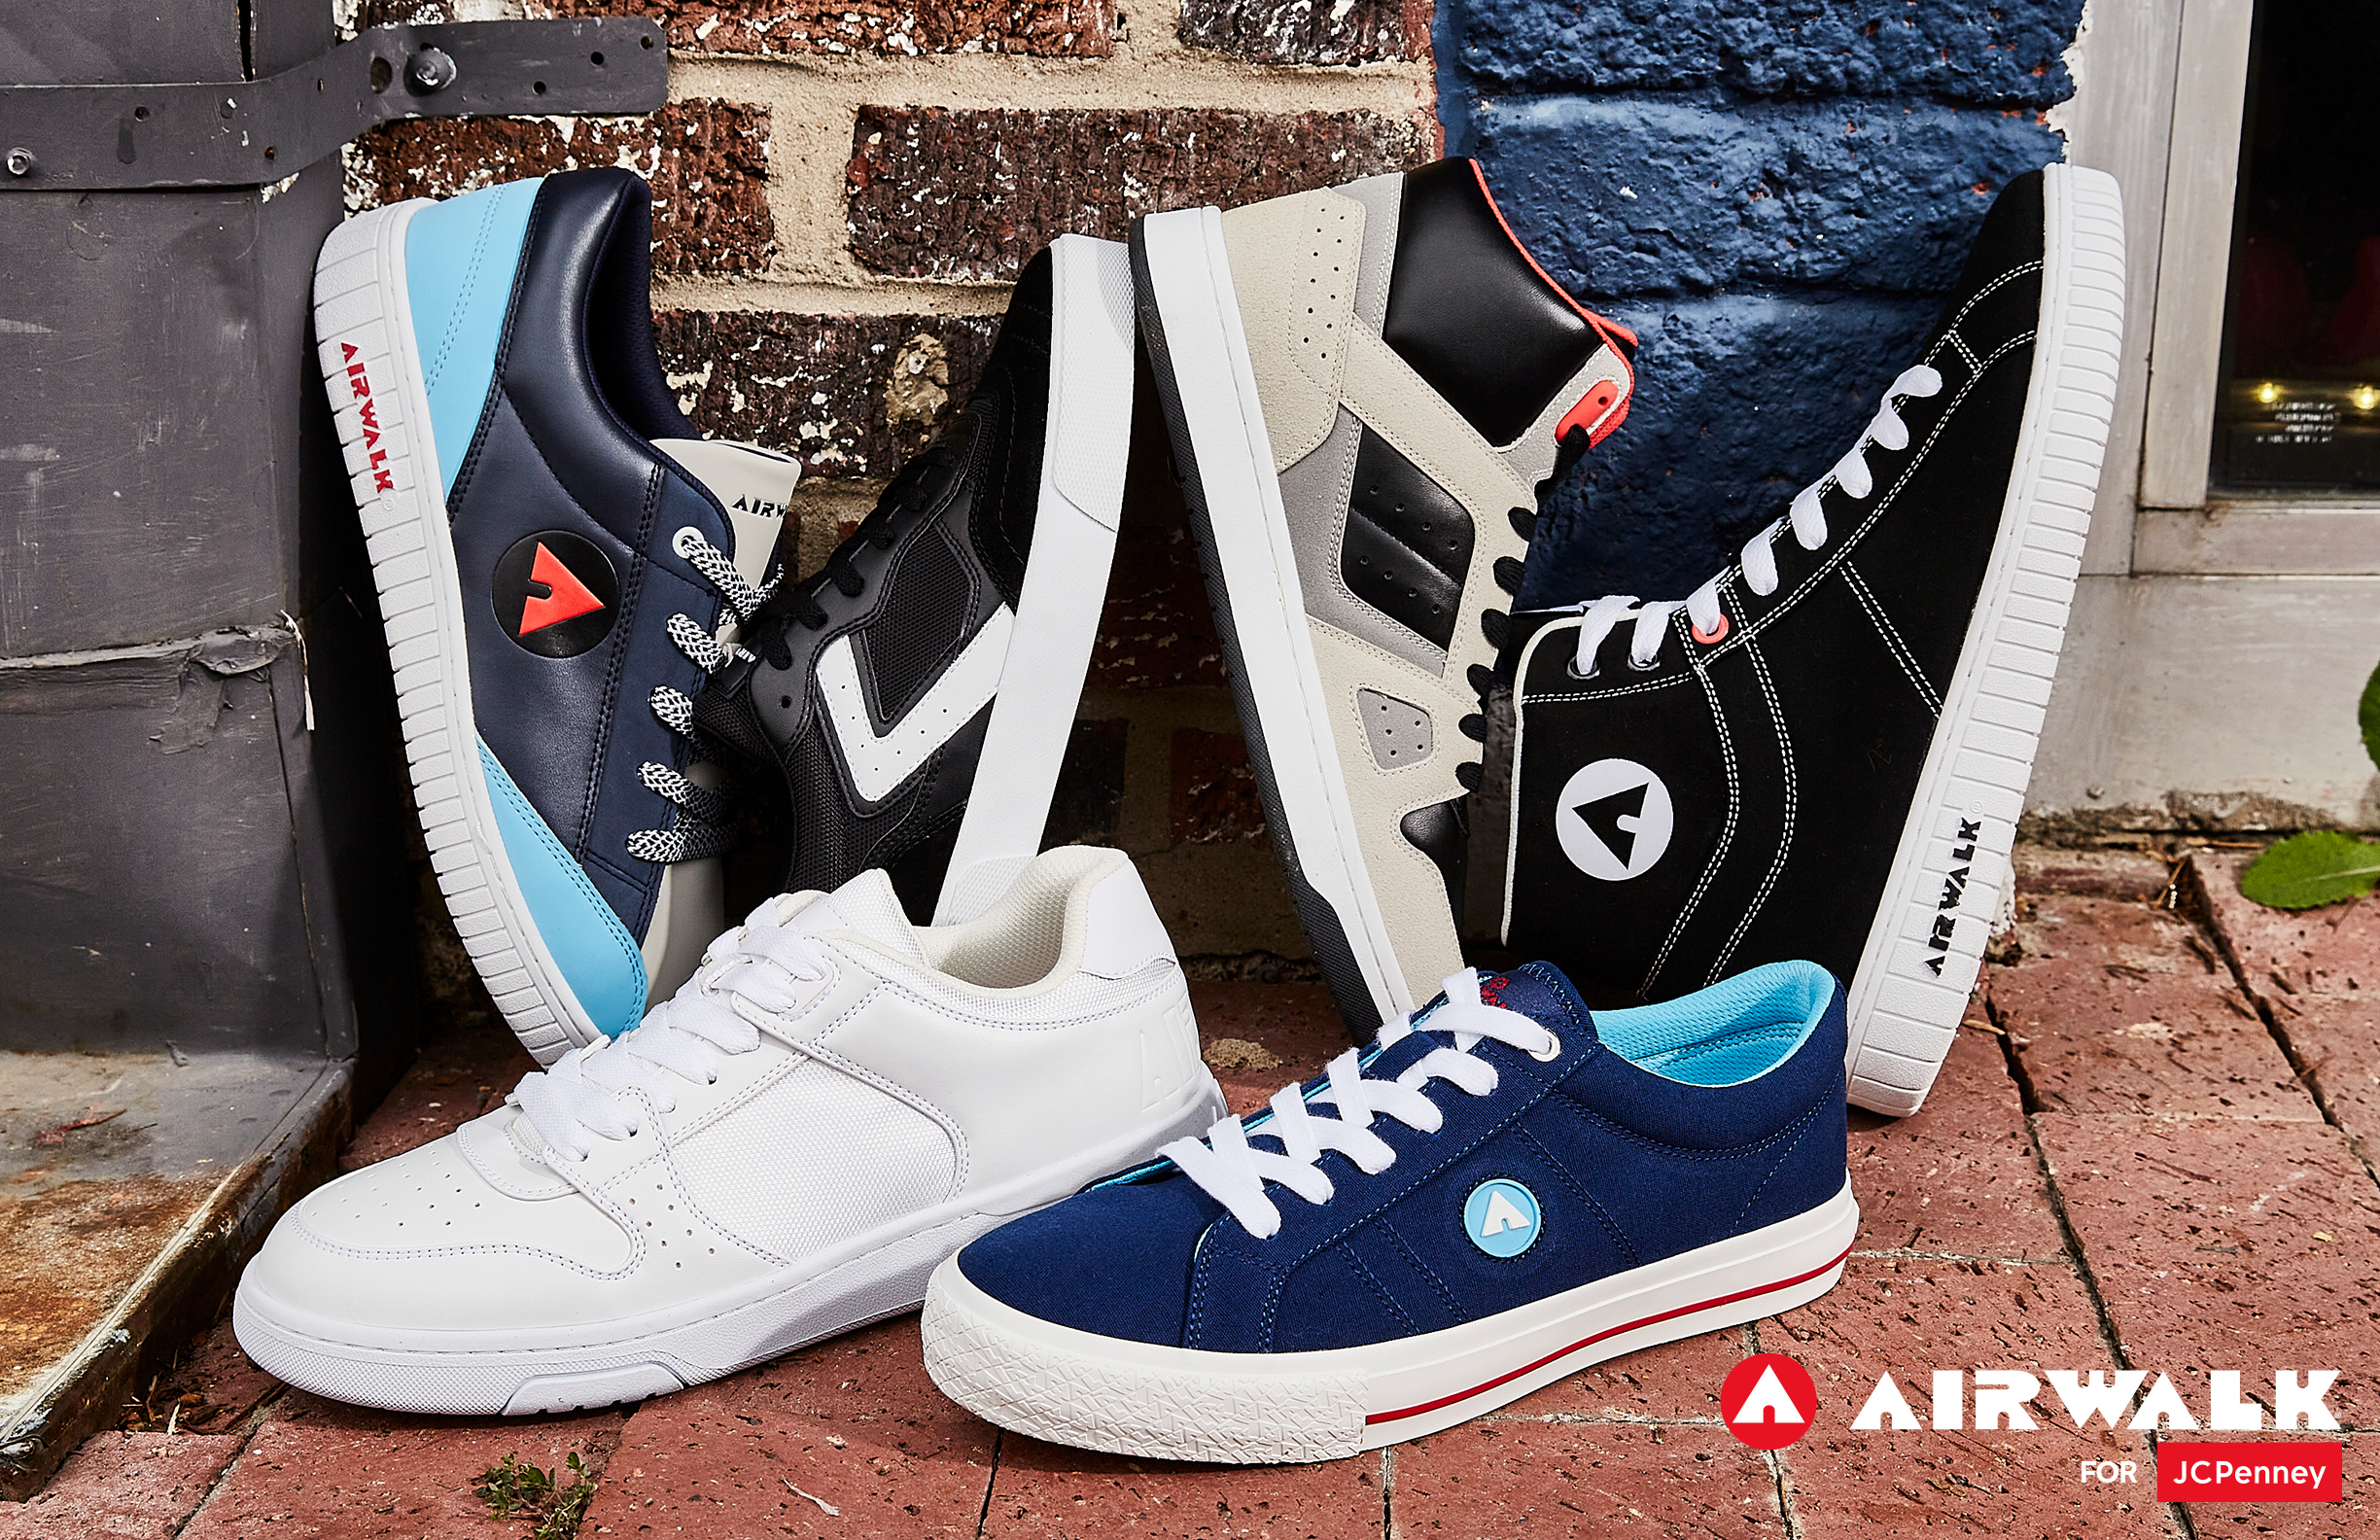 JCPenney unveils iconic Airwalk skater-style footwear collection -  